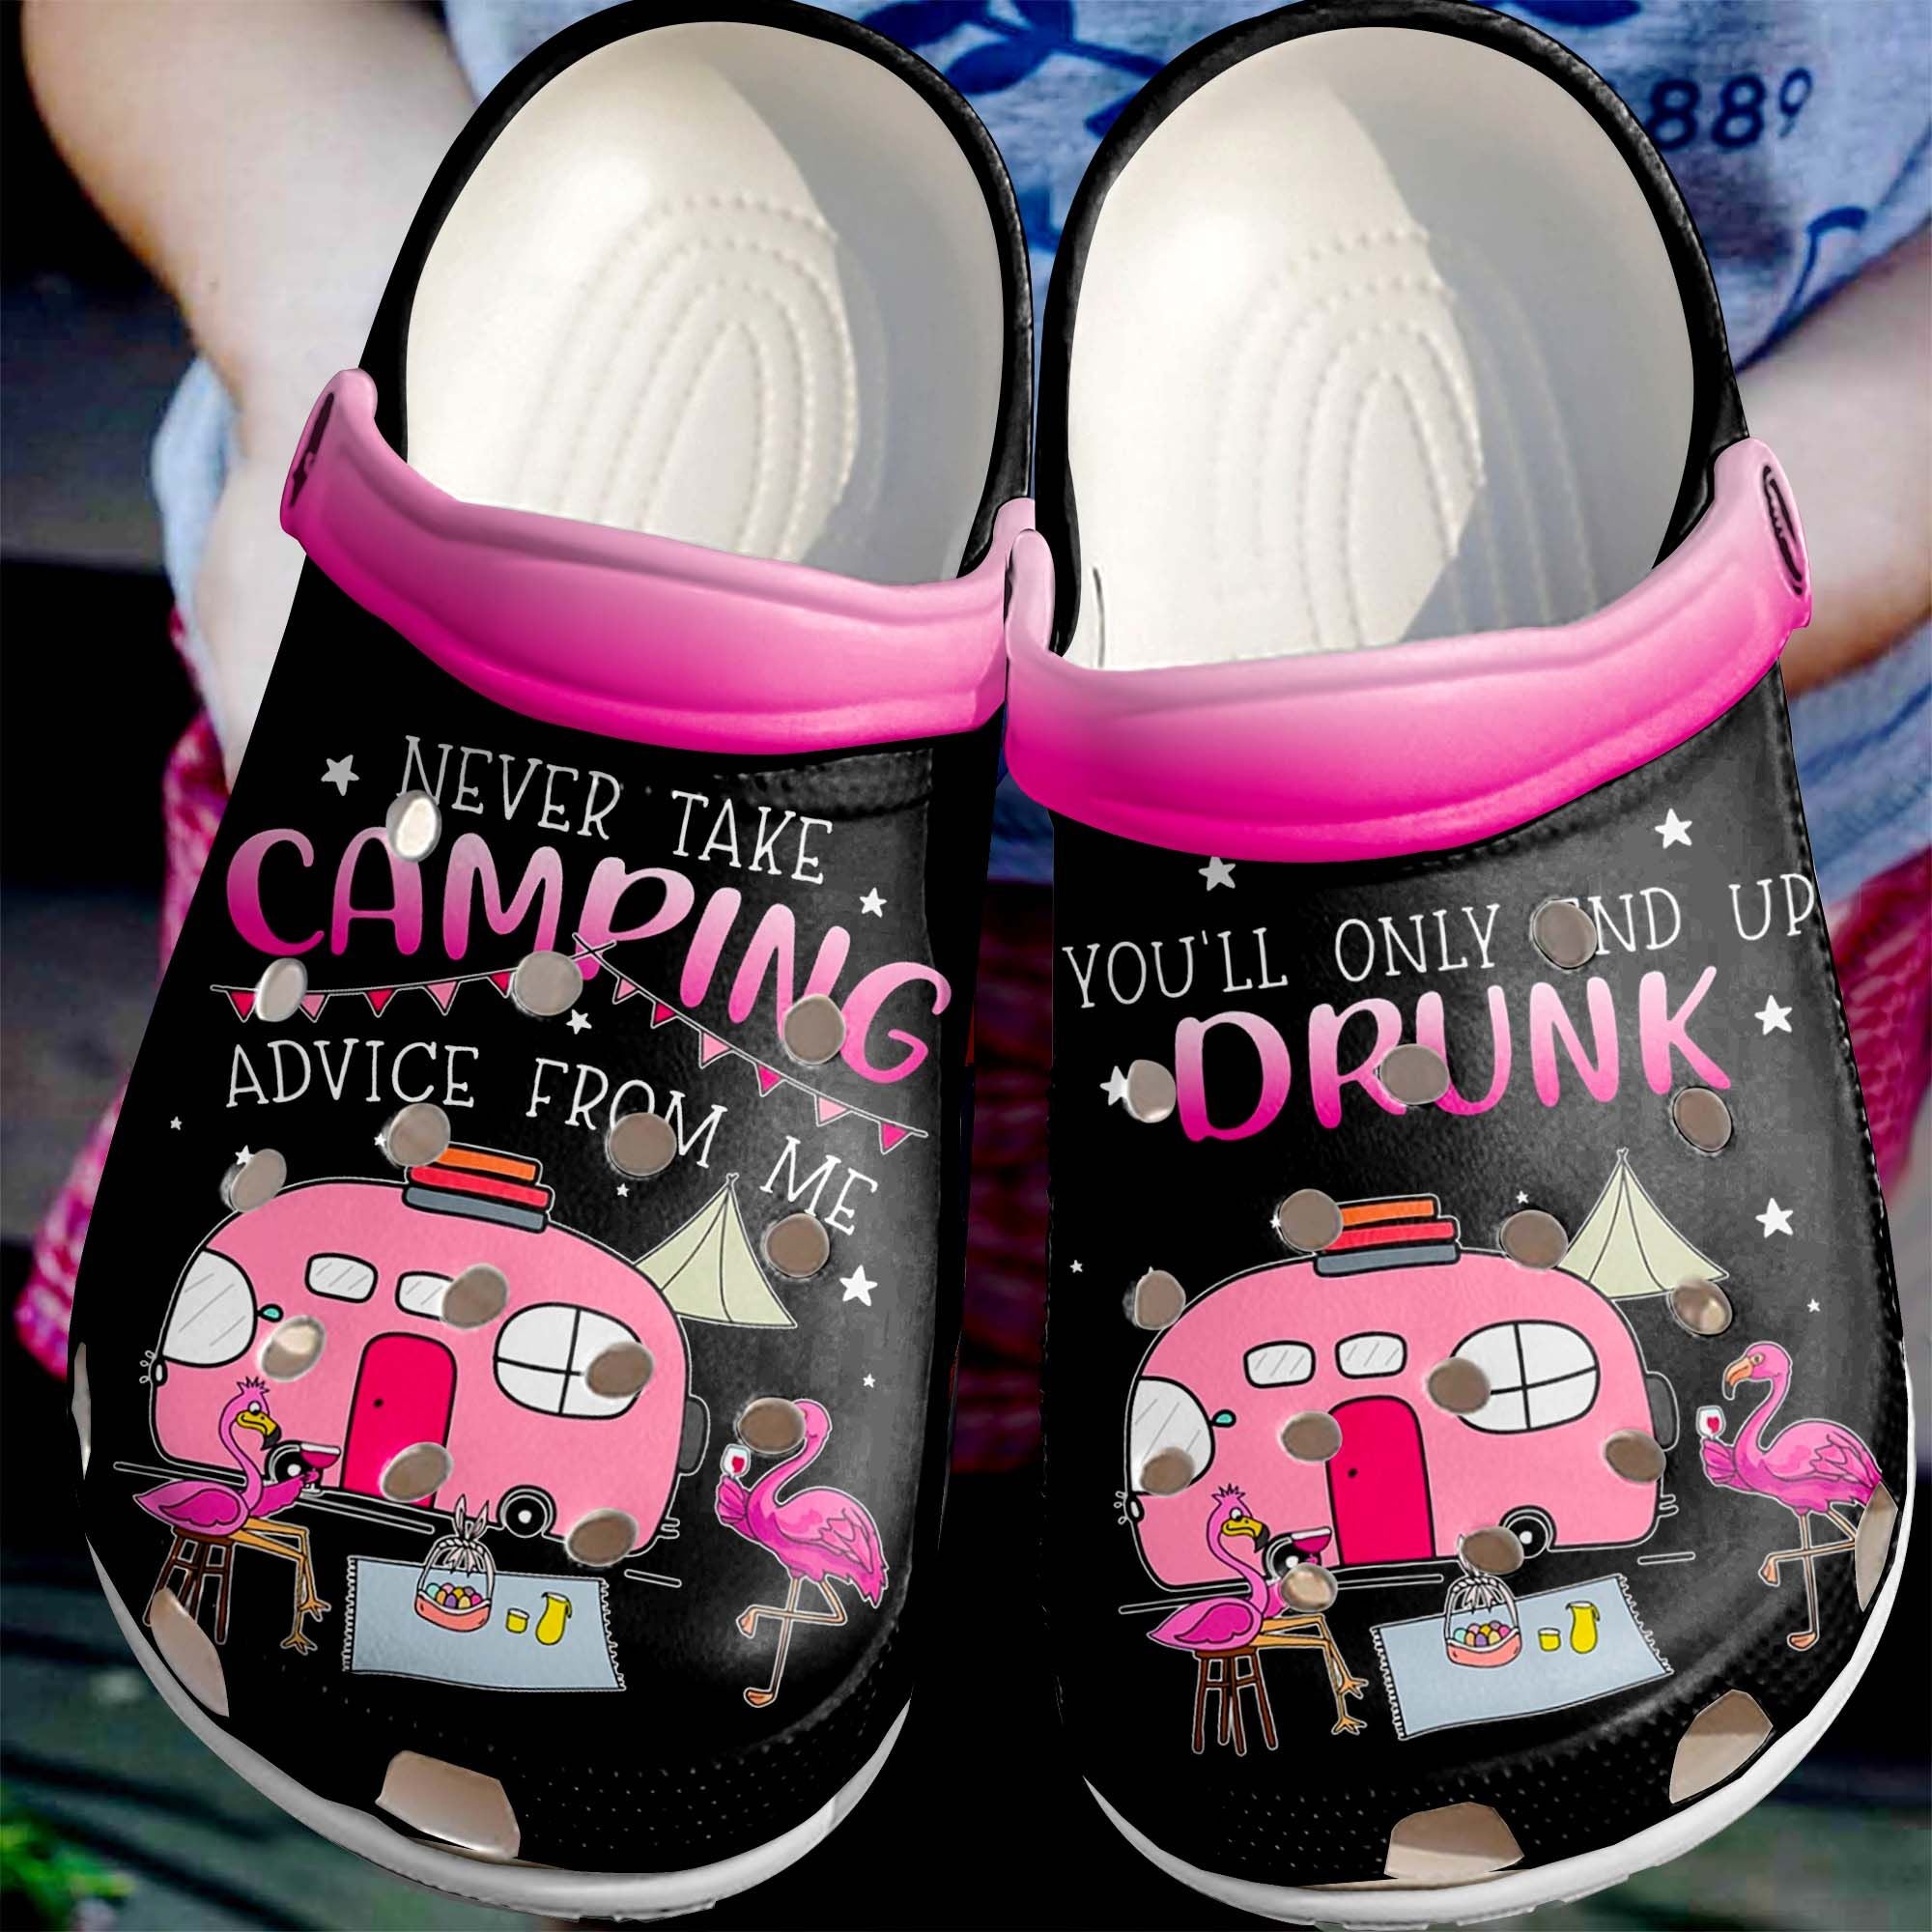 Flamingo You'll Only And Up Drunk, Never Take Camping Advice From Me Outdoor Clog Shoes Custom Birthday Gift Men And Women